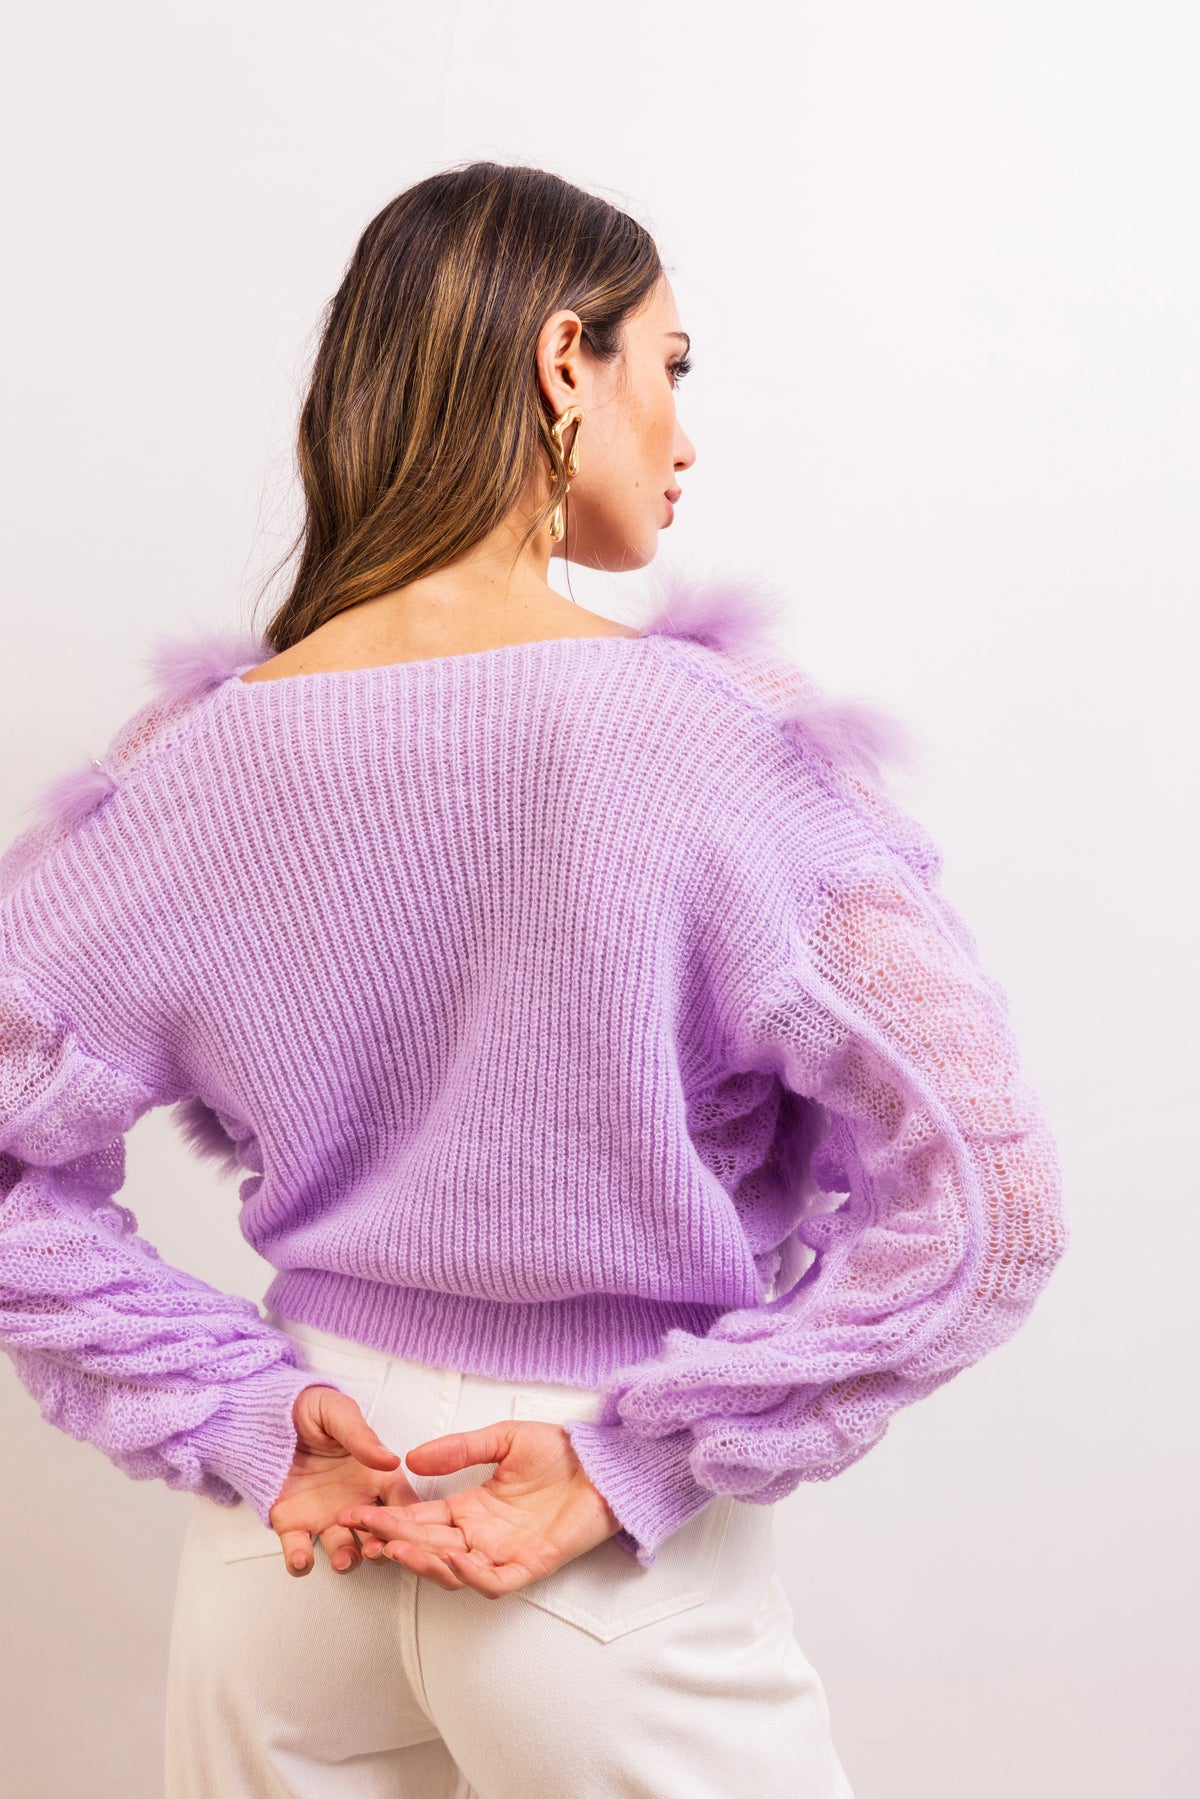 My Favor Embellished Wool Sweater in Lilac